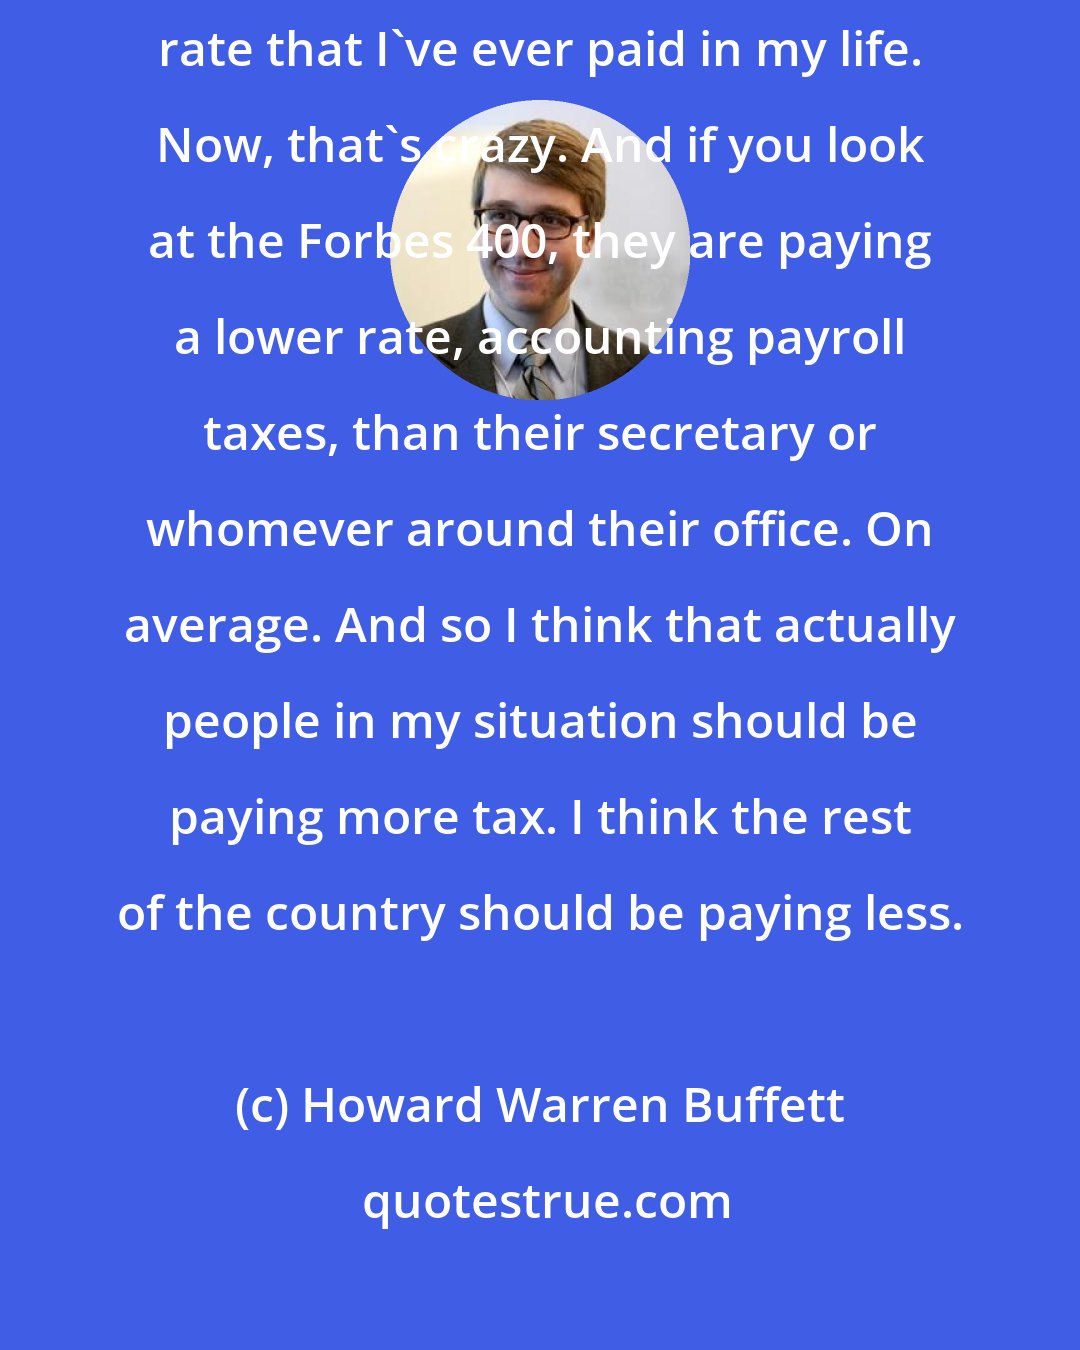 Howard Warren Buffett: I've never had it so good in terms of taxes. I am paying the lowest tax rate that I've ever paid in my life. Now, that's crazy. And if you look at the Forbes 400, they are paying a lower rate, accounting payroll taxes, than their secretary or whomever around their office. On average. And so I think that actually people in my situation should be paying more tax. I think the rest of the country should be paying less.